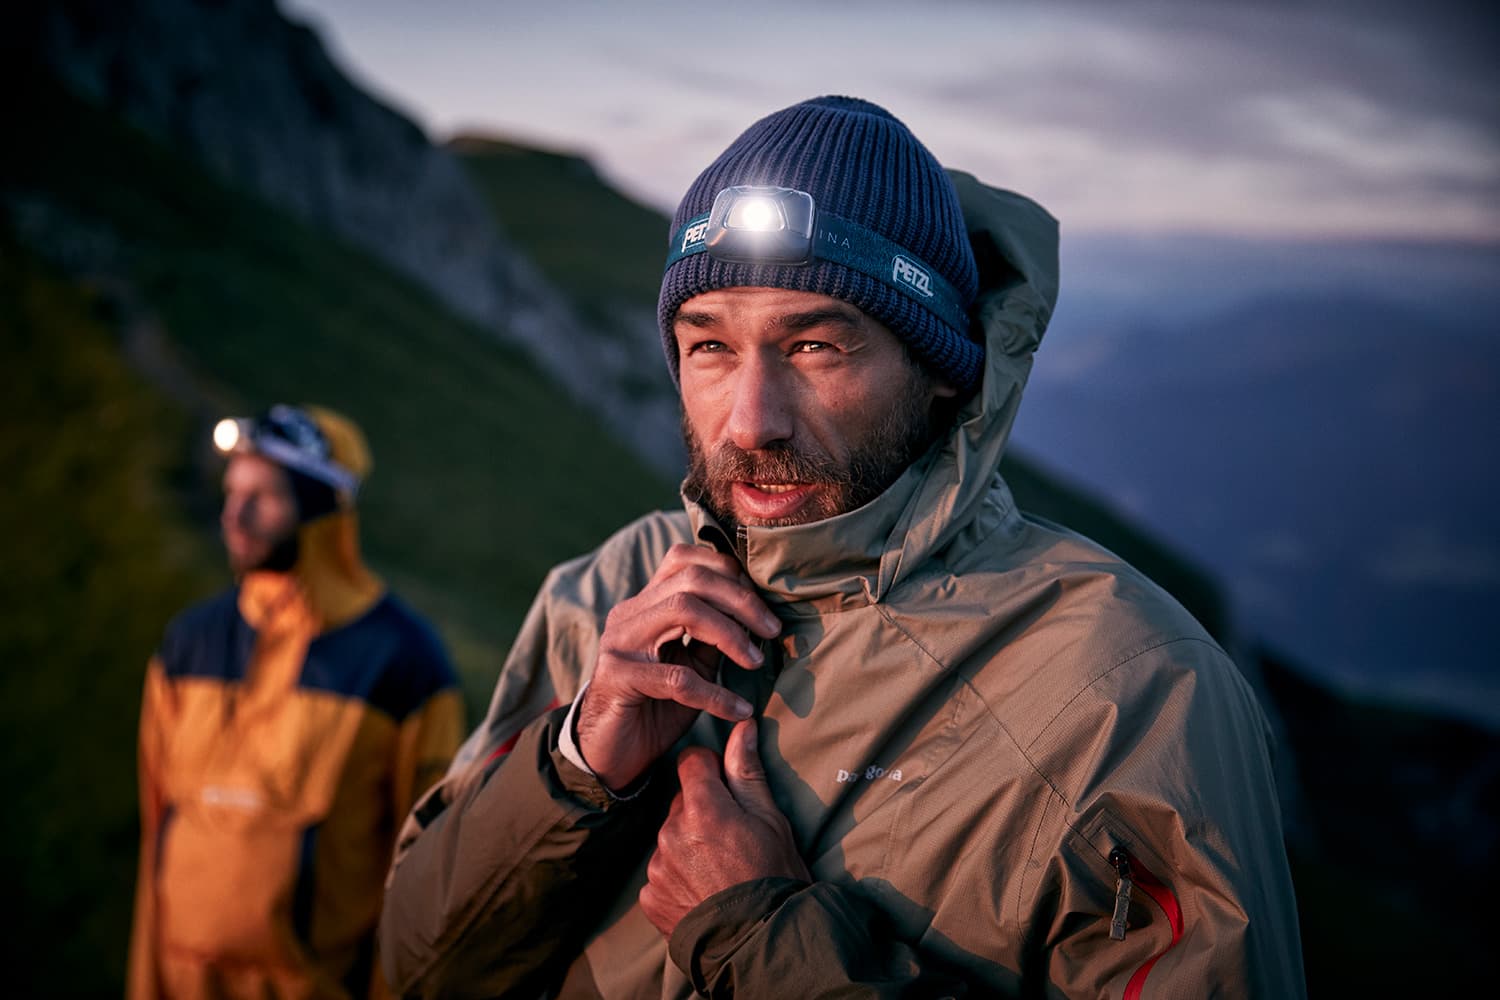 Portrait of a man closing his jacket while wearing a petzl headtorch while on a trailrun in the sunrises